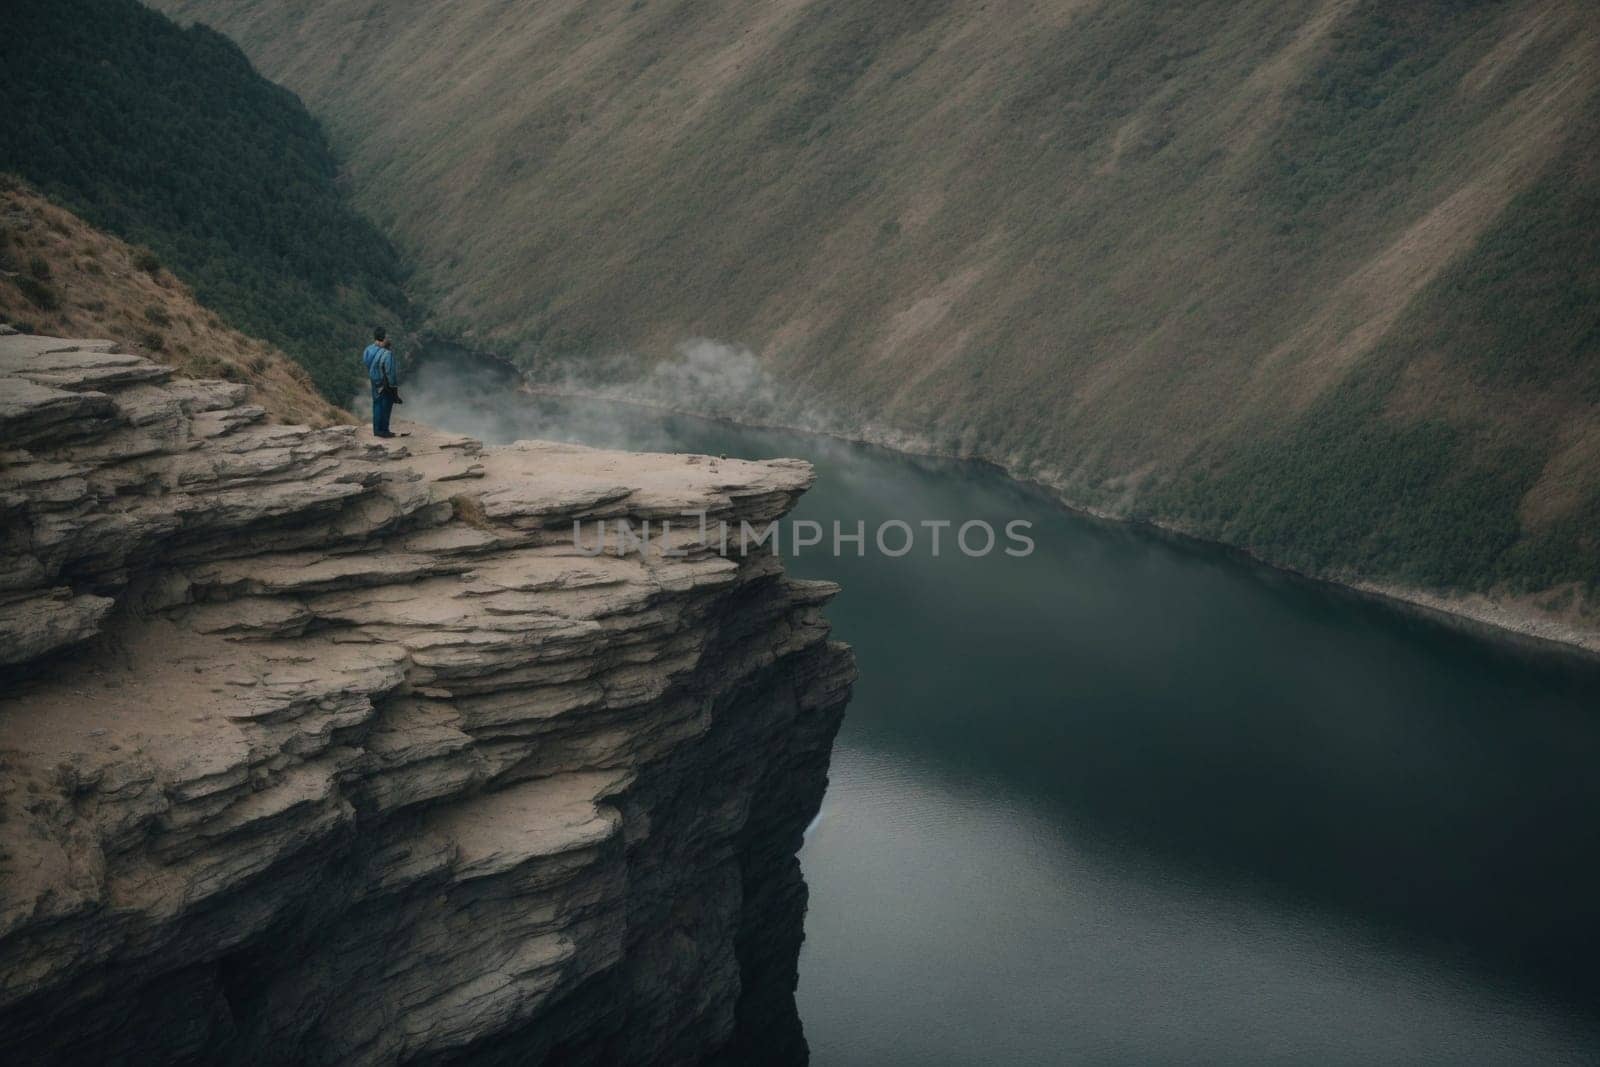 A person stands on a cliff, taking in the breathtaking view of a vast body of water.